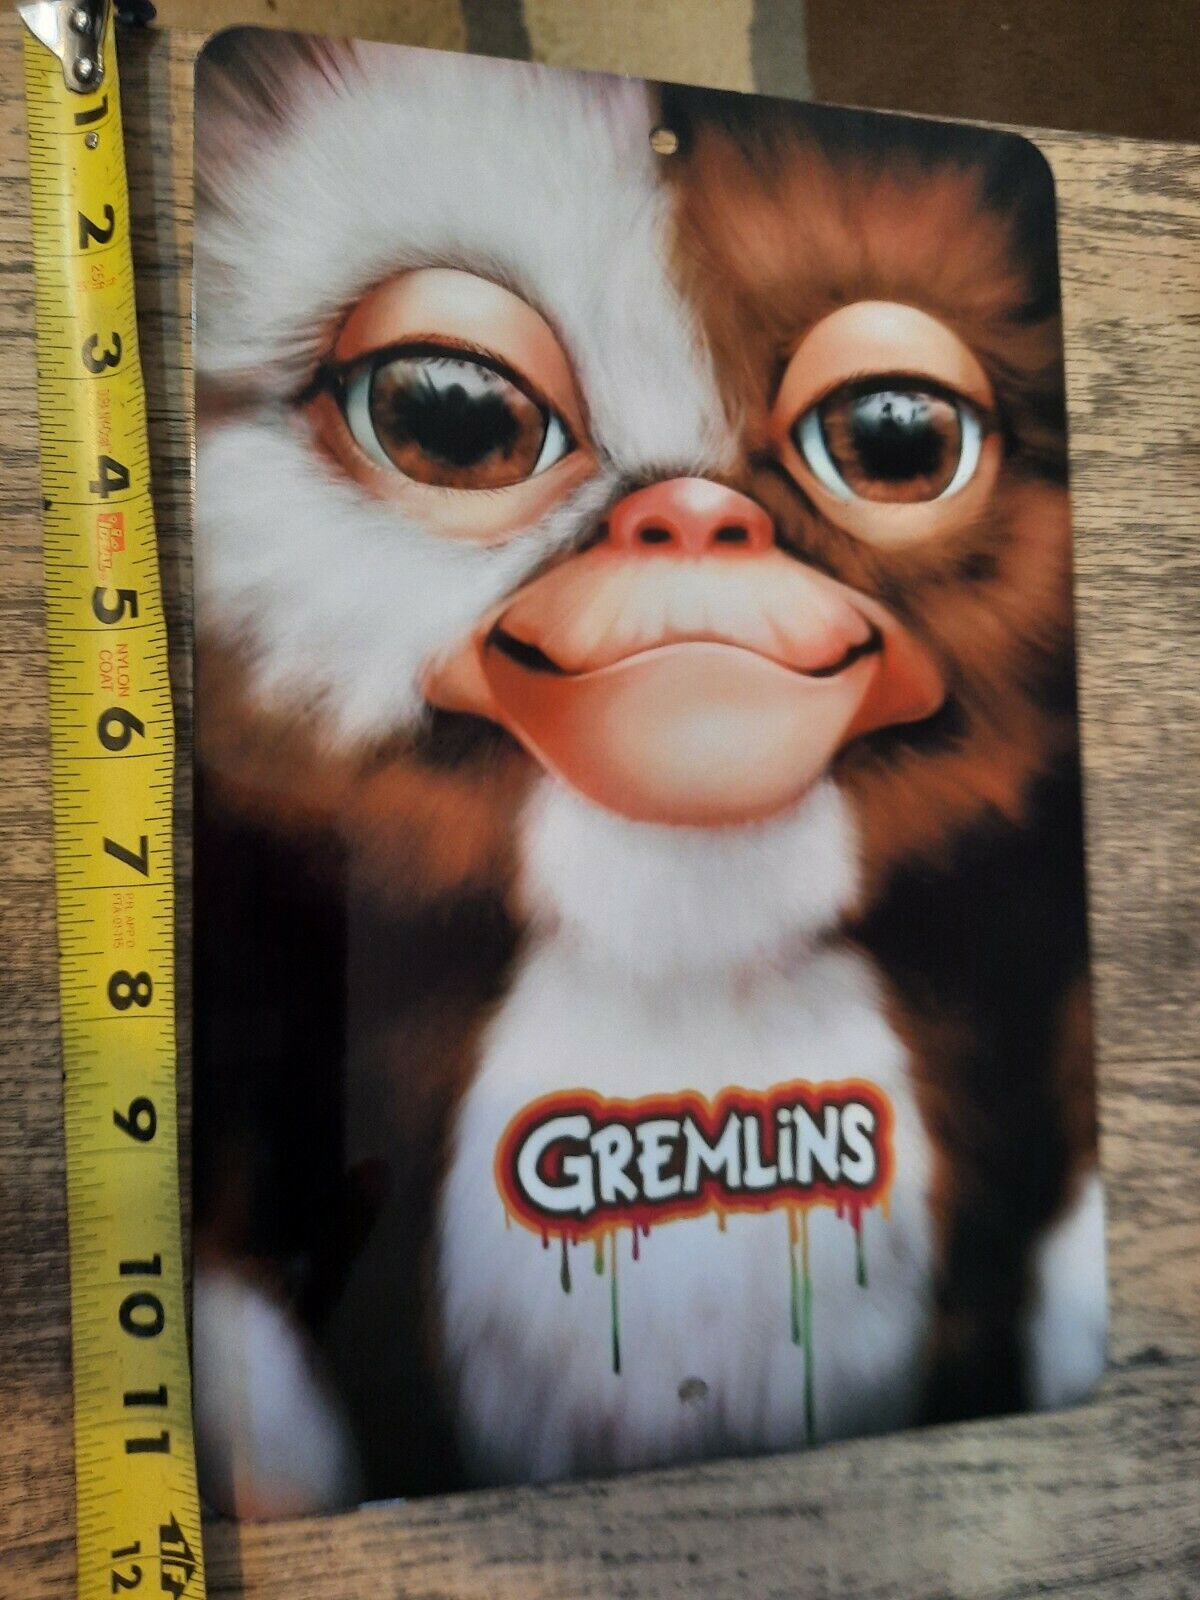 Gizmo Gremlins 8x12 Metal Wall Sign #1 Horror Holidays Comedy Movie Poster